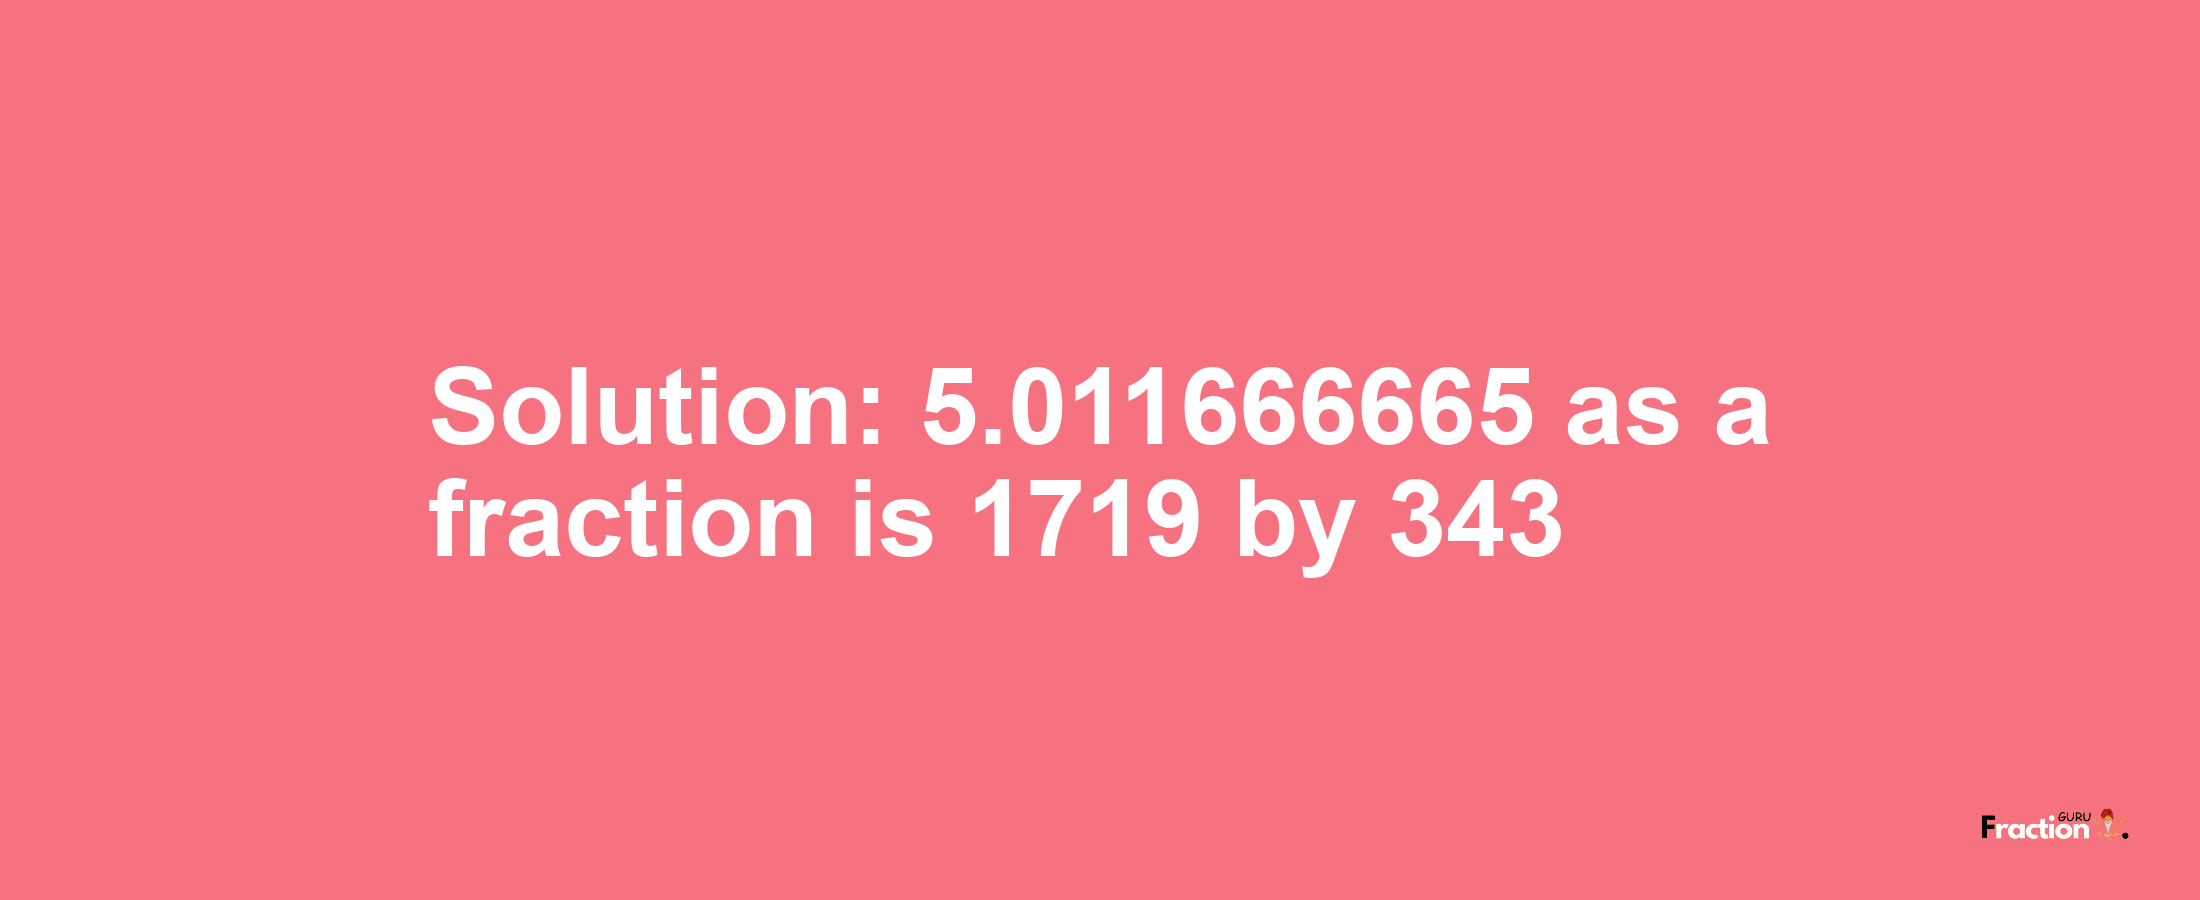 Solution:5.011666665 as a fraction is 1719/343